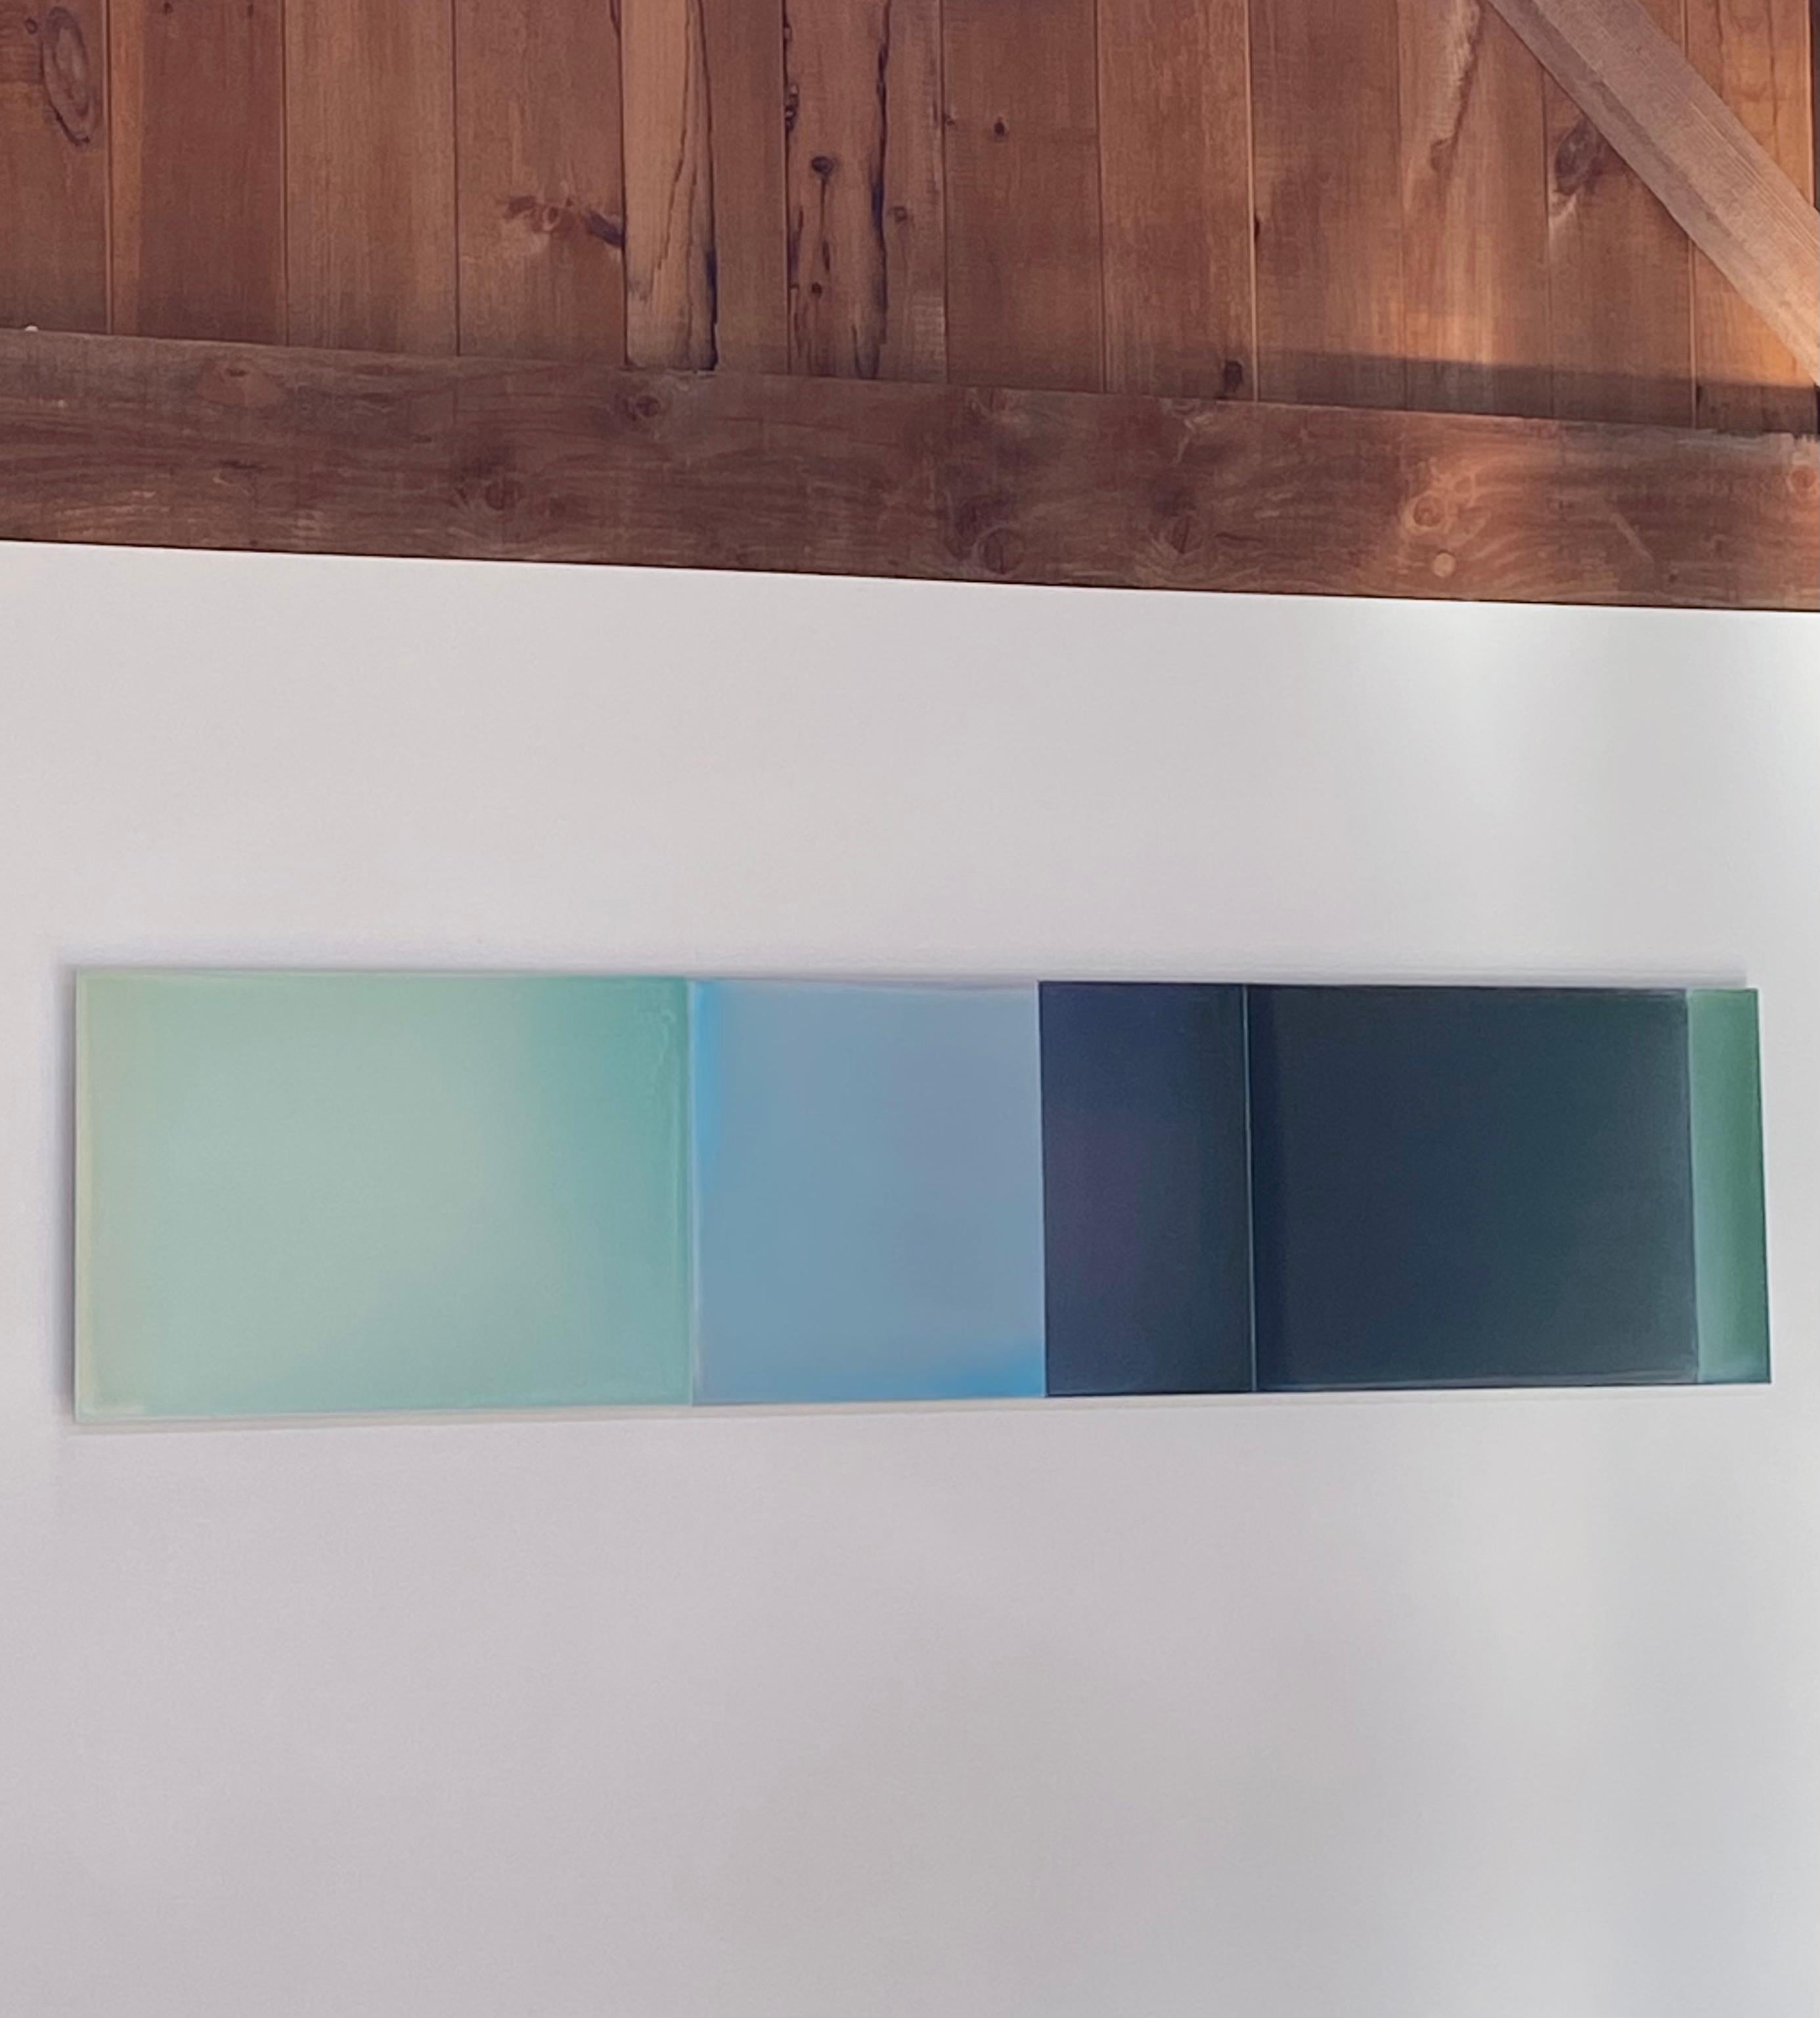 The surface of Two Stories No. 2 by Susan English is a wonderful play of color, light, and composition. Hues of soft jade, pale teal bluish green, light blue, dark indigo and dark olive green meet and merge in softly transitioning planes. The poured